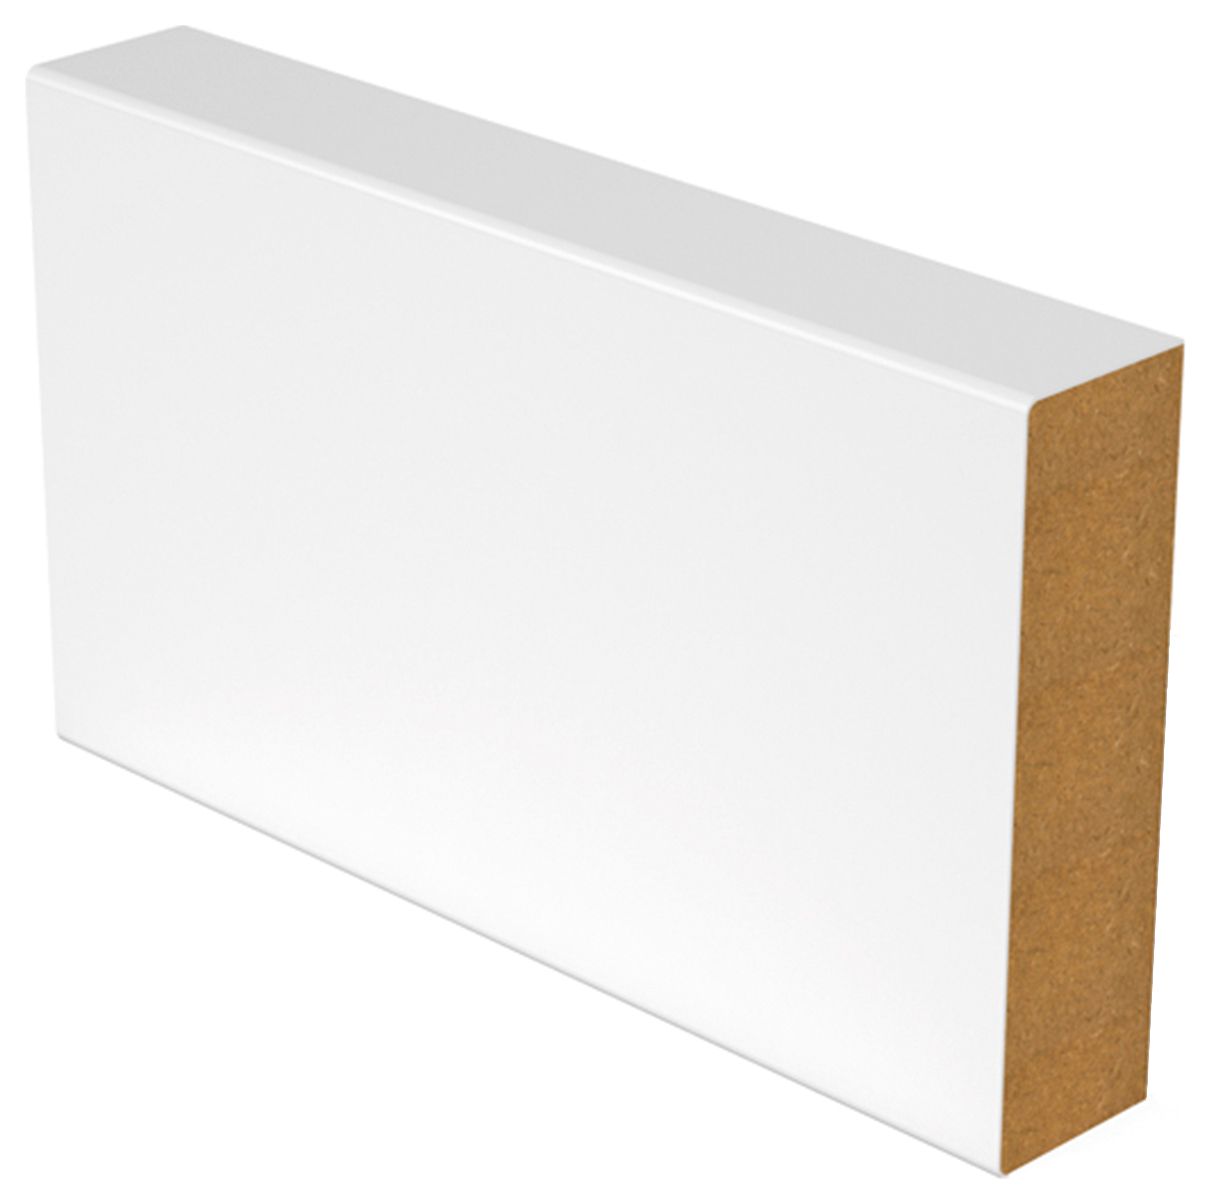 Image of Wickes Square Edge White MDF Skirting - 18 x 94 x 4200mm